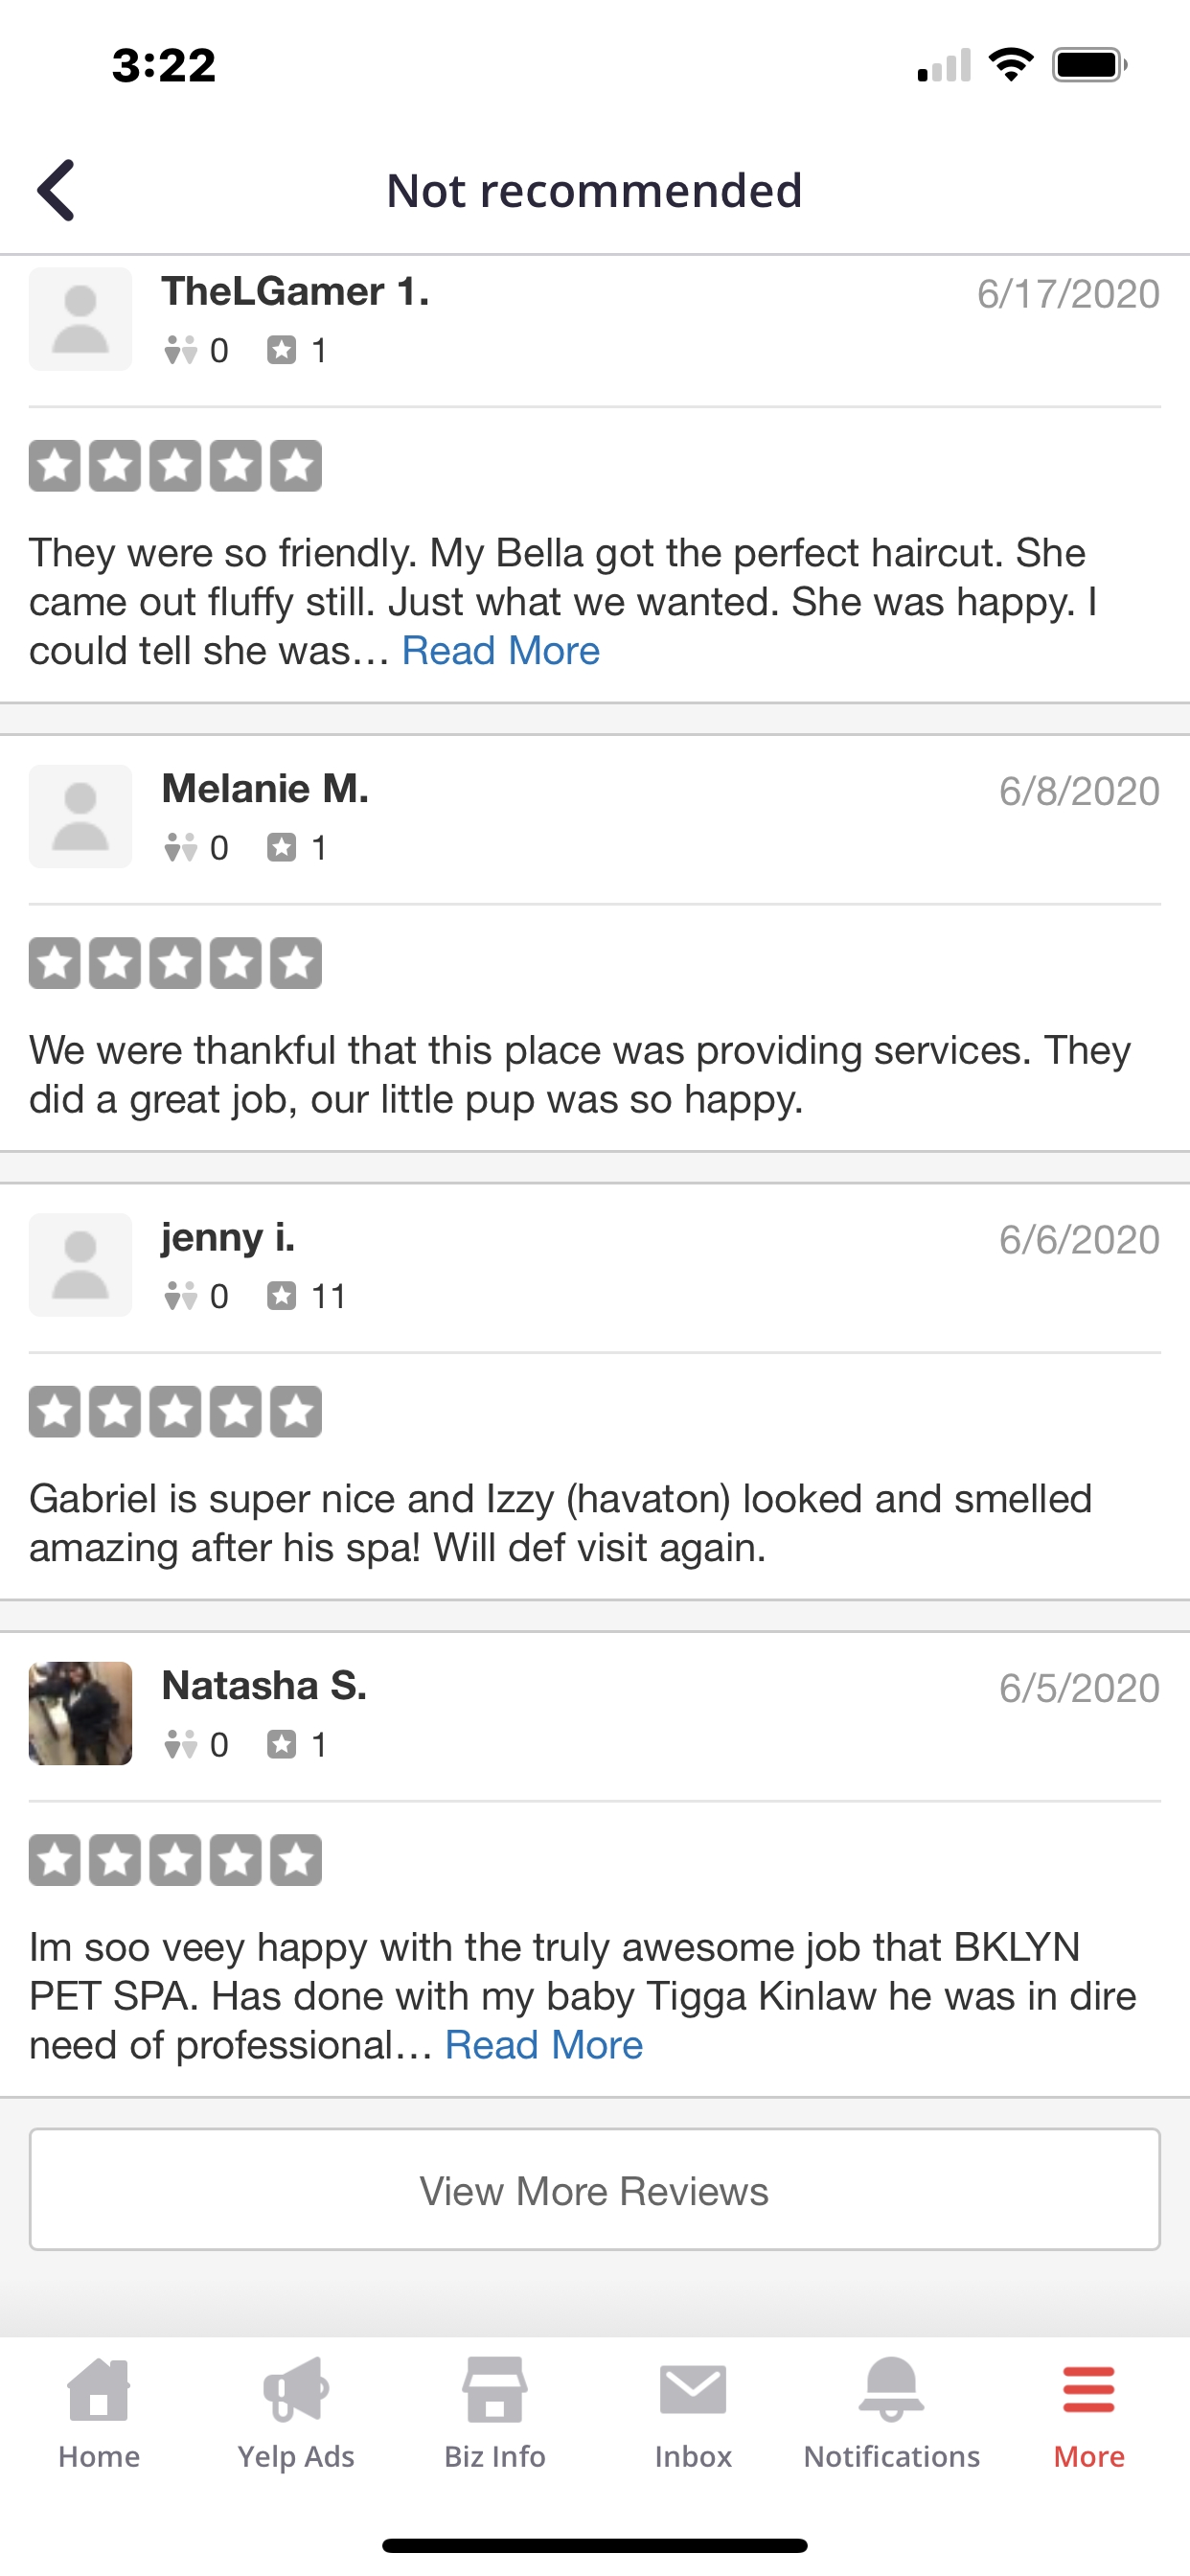 yelp for business owners review complaint